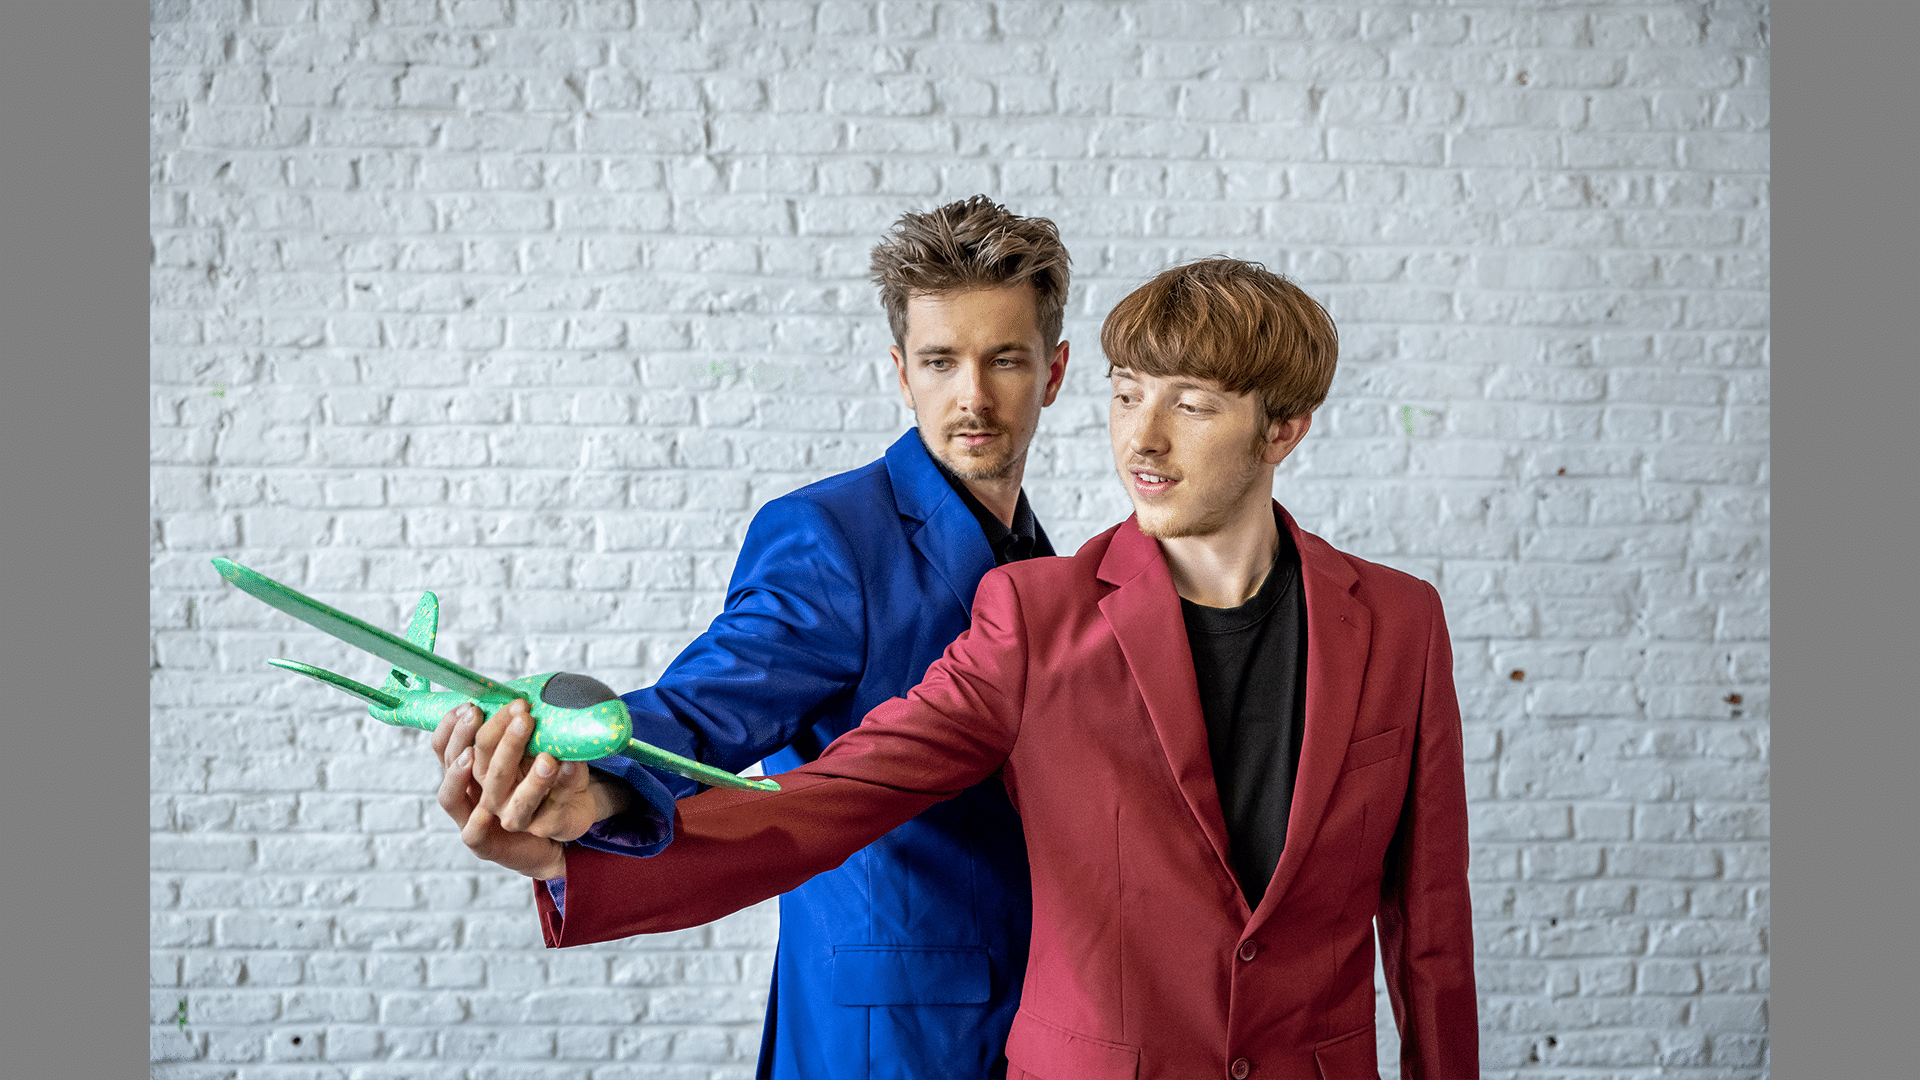 Two performers wear red and blue suits and hold a miniature plane.